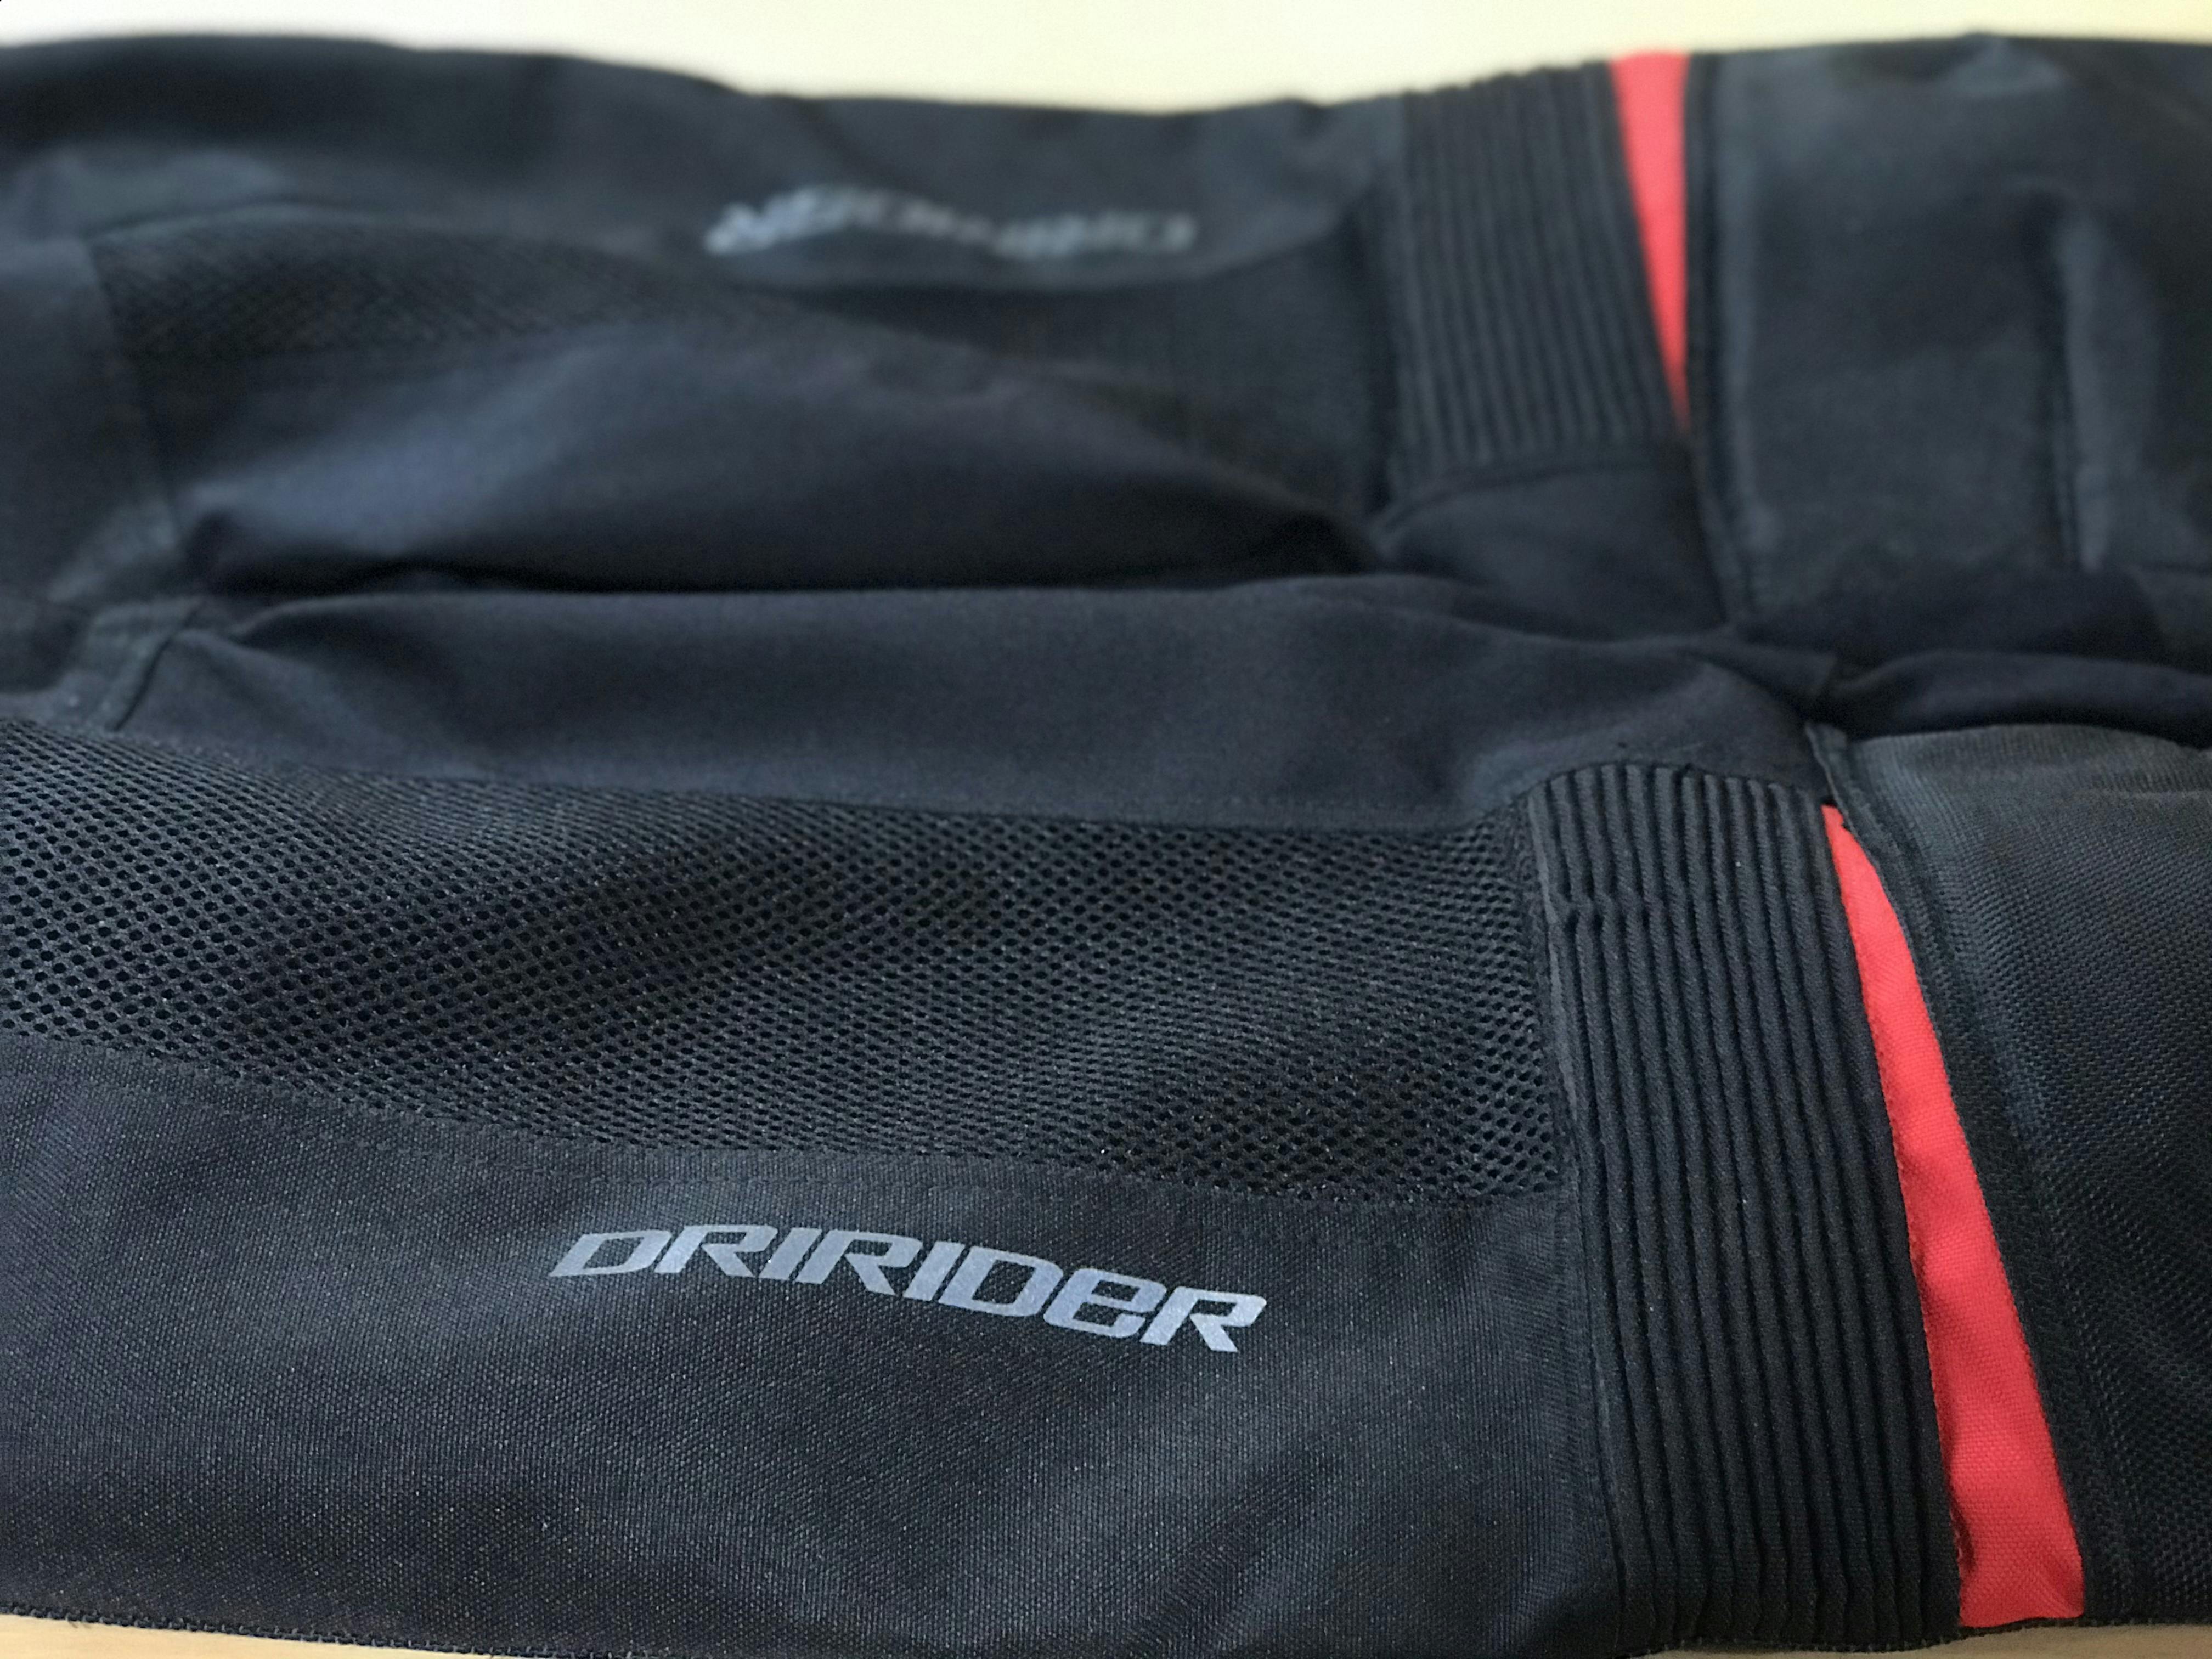 Dri Rider Air Ride textile pant vents in black and red